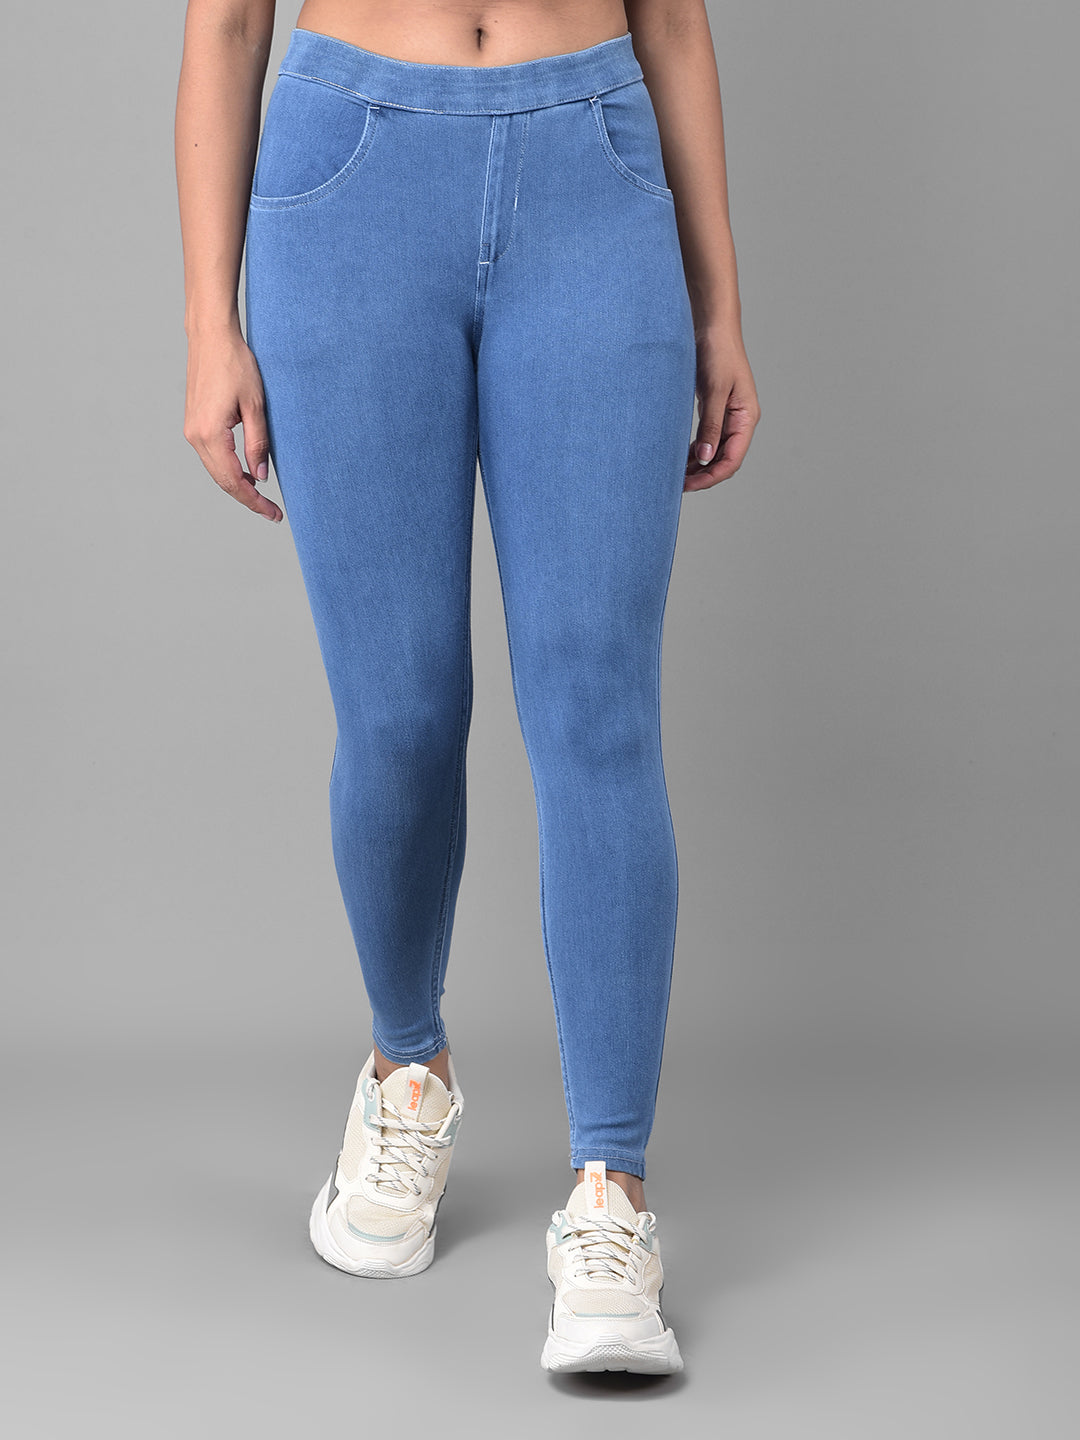 Comfort Lady Girls Bottom Wear Denim Jeggings in Ahmedabad at best price by  Comfort Lady - Justdial